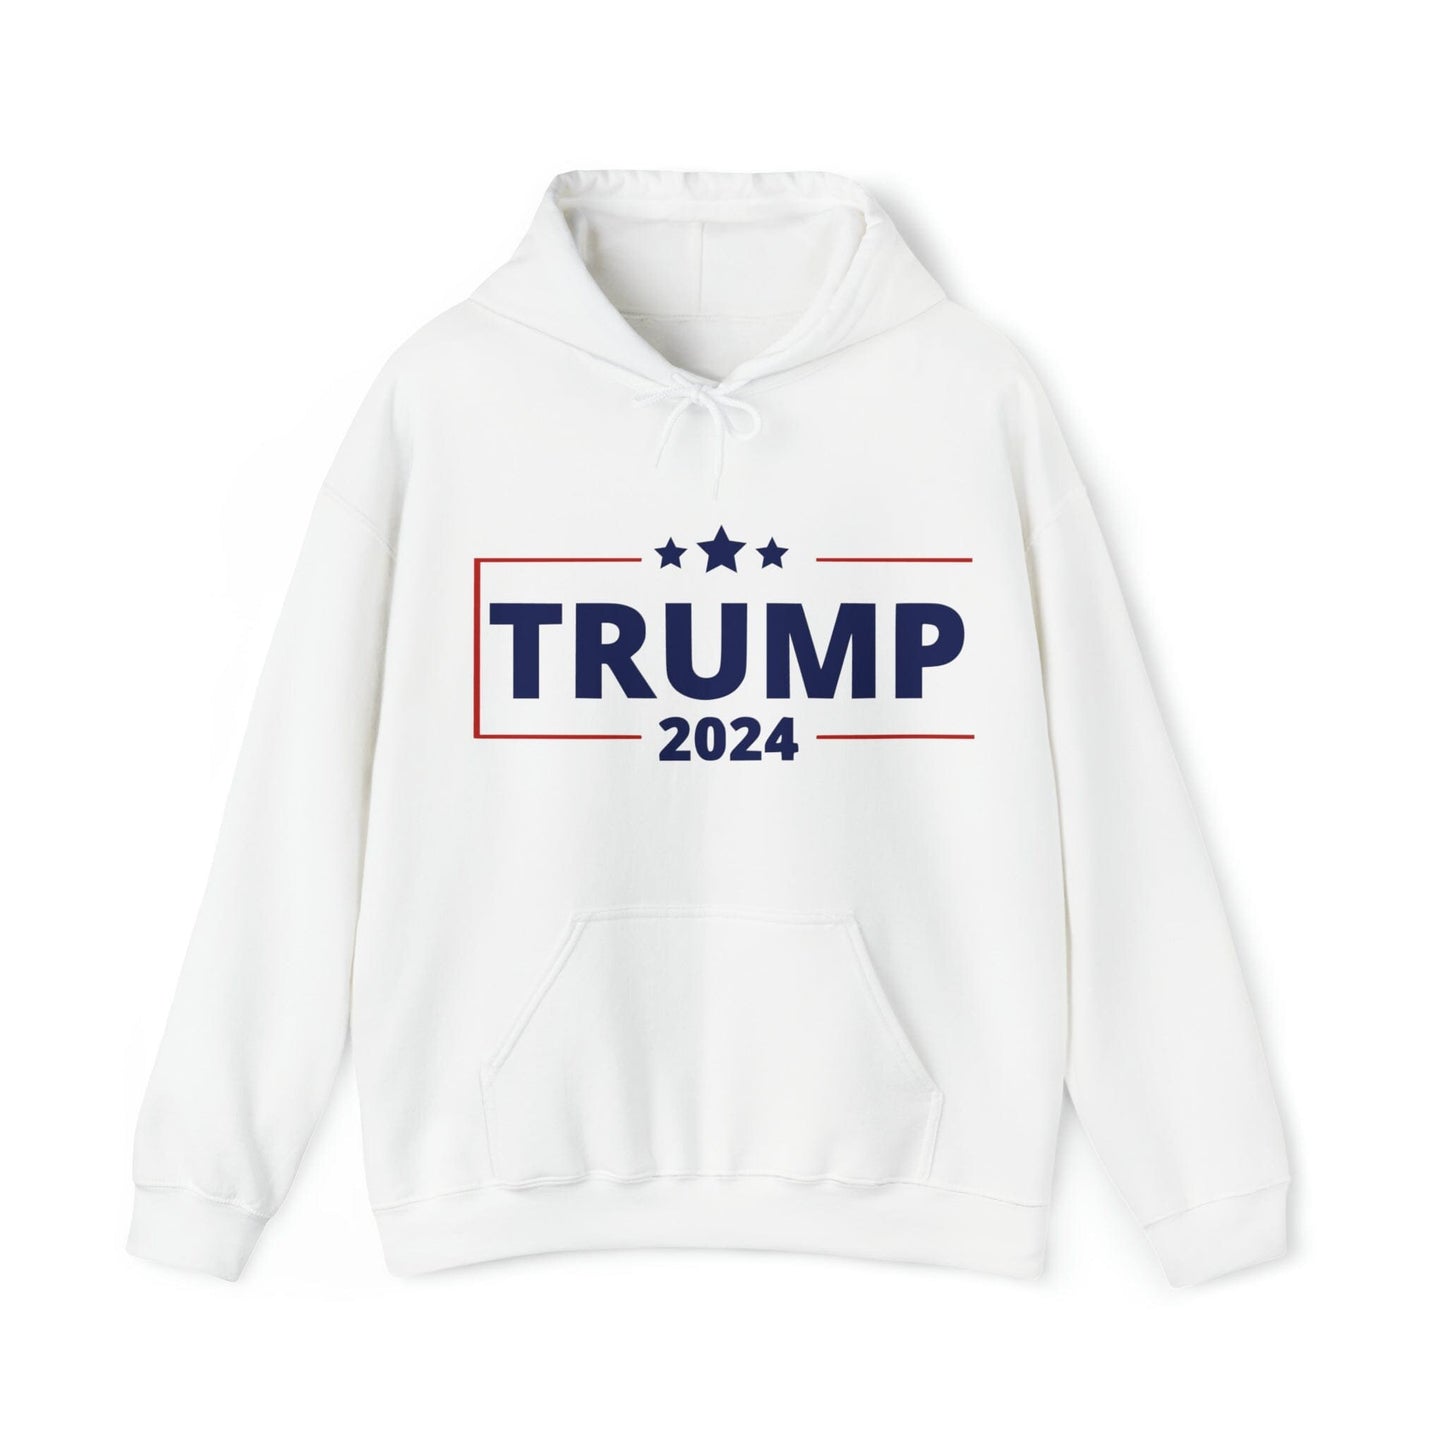 Trump 2024 Hoodie, Hooded Sweatshirt For The 2024 Election, Pullover Sweatshirt for Women, Make America Great Clothes, America First